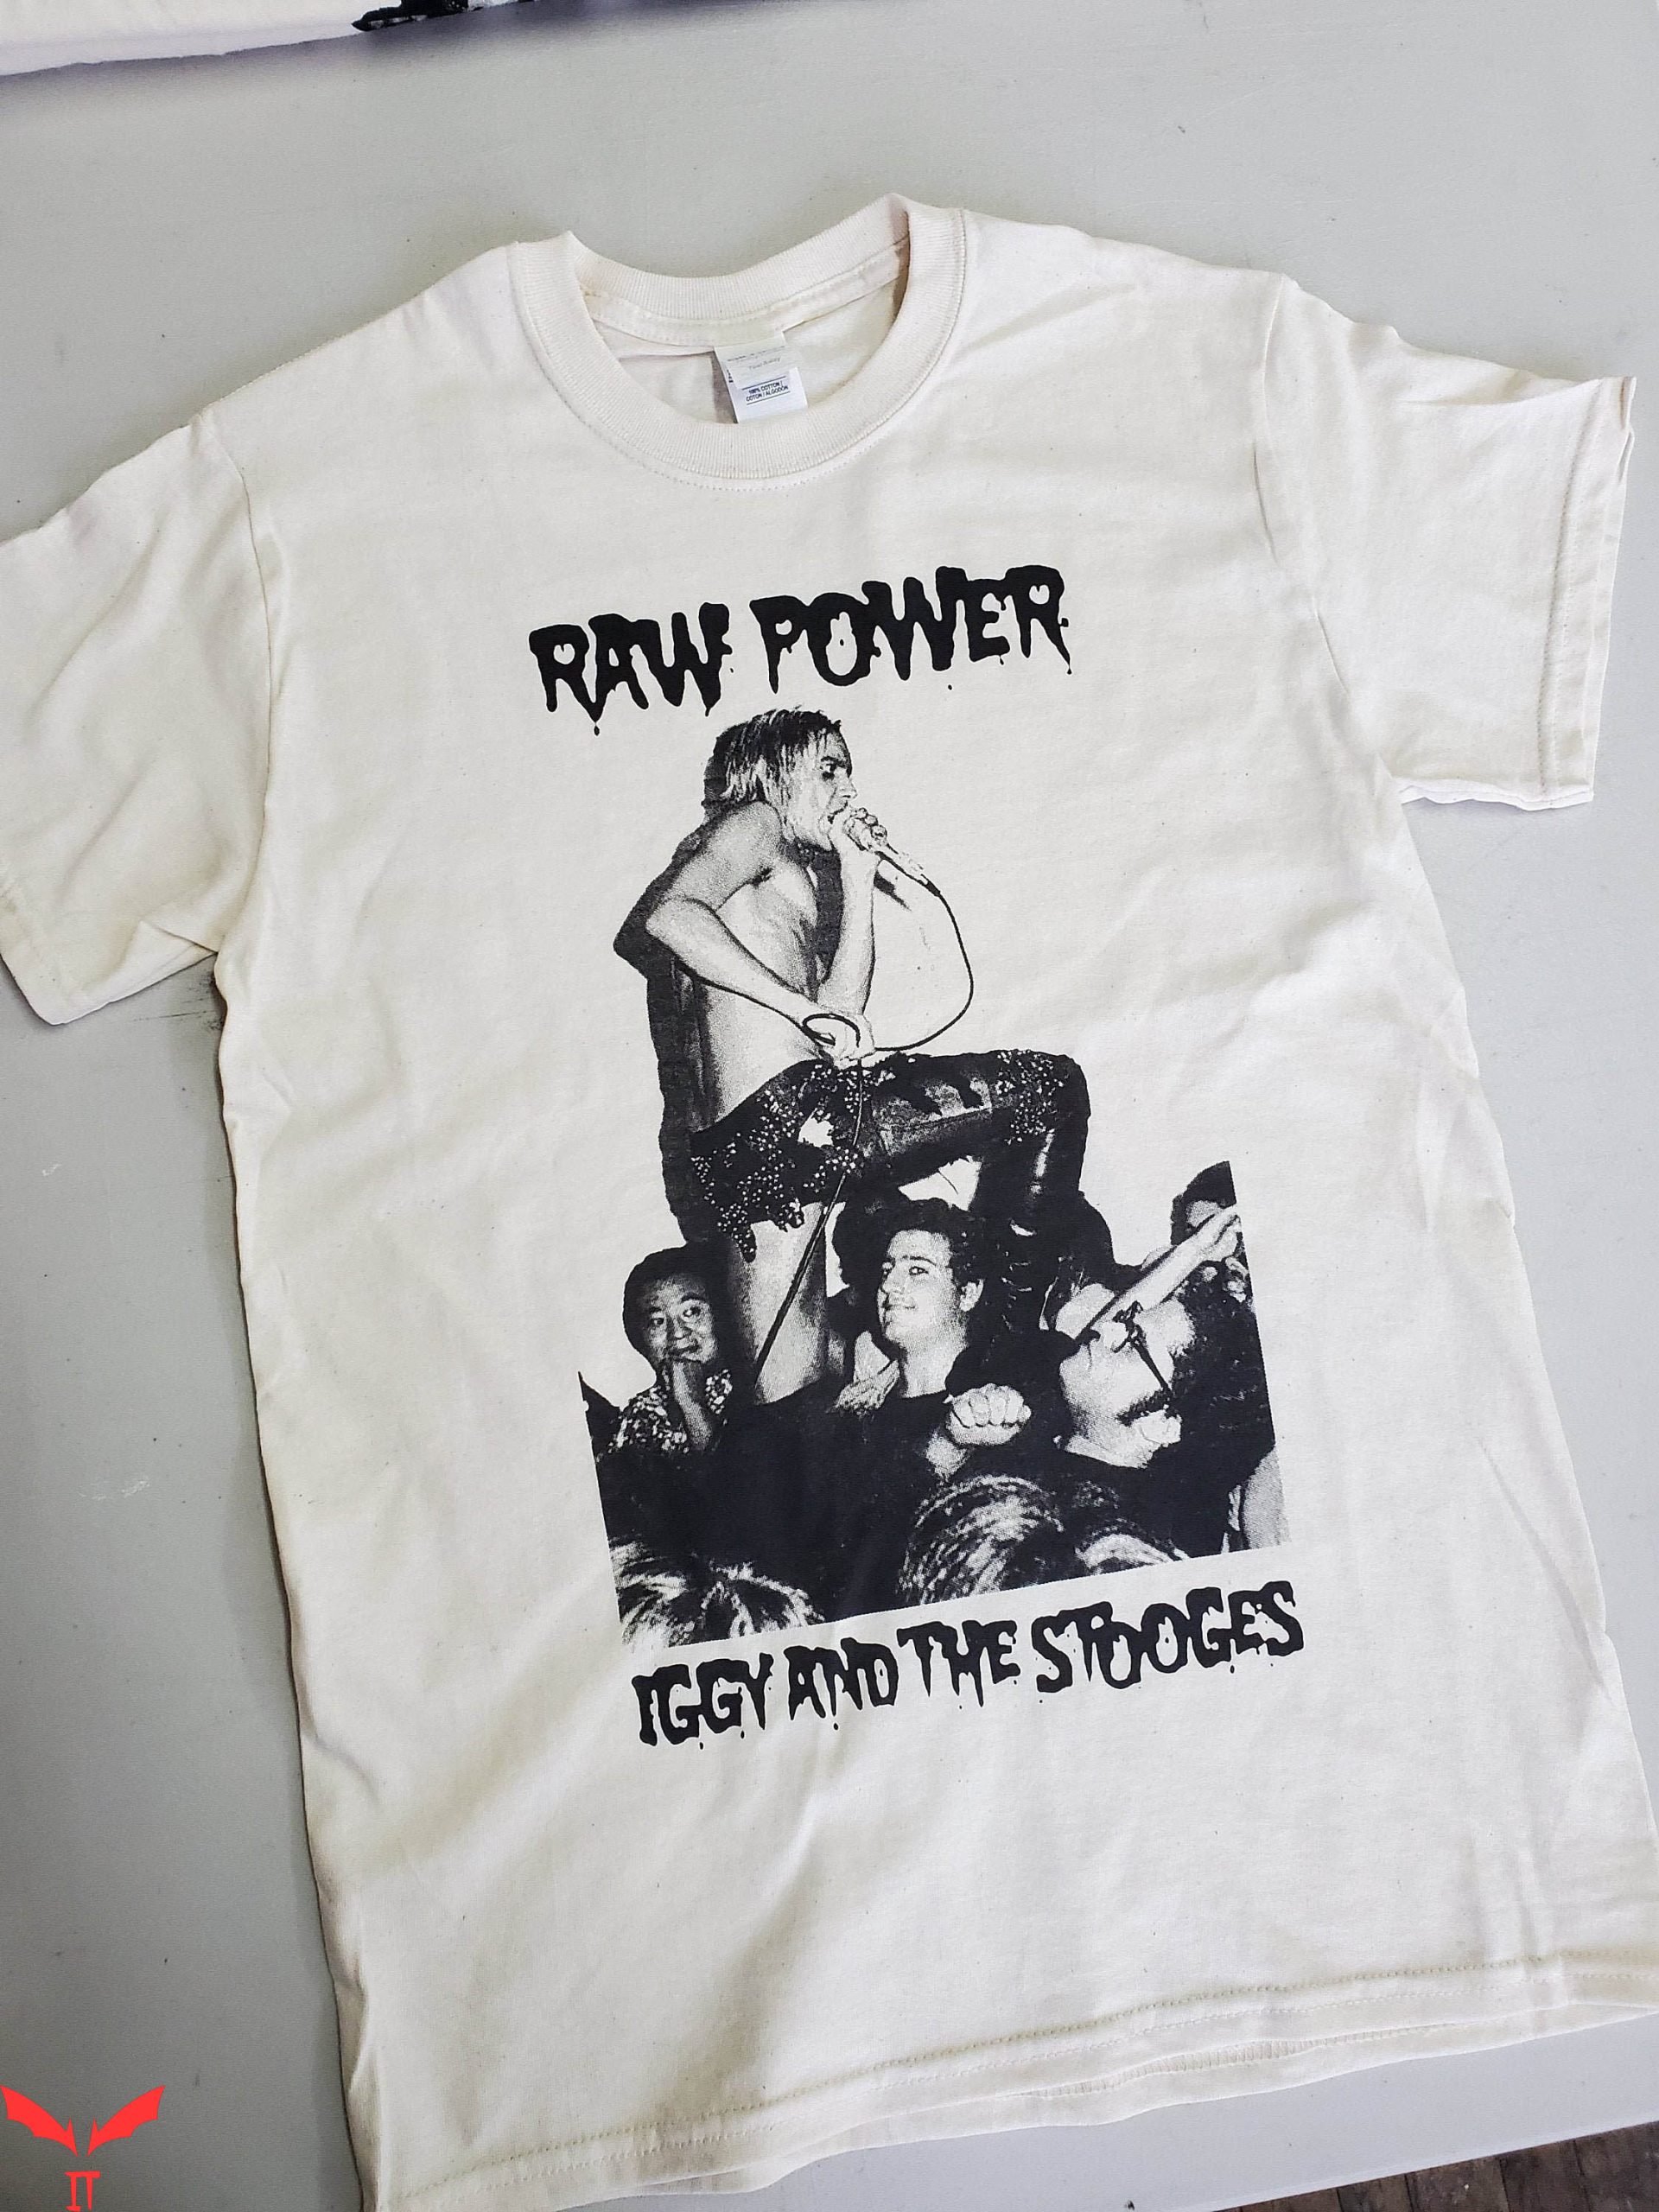 The Stooges T-Shirt Iggy And The Stooges Raw Power Shirt